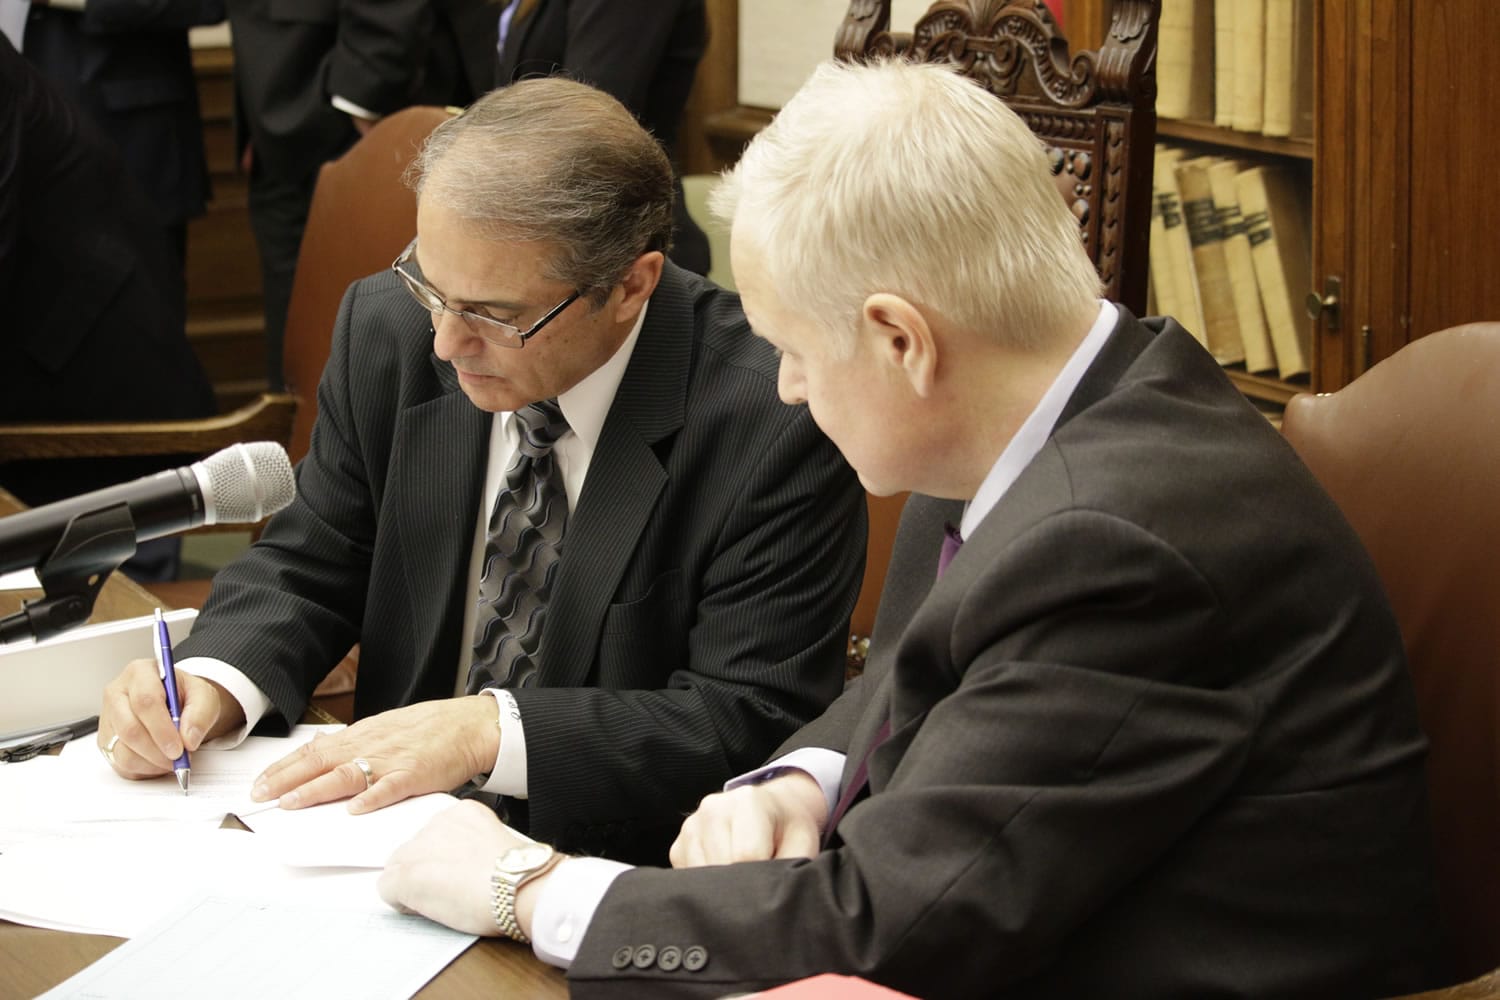 Lt. Gov. Brad Owen signs subpoenas as Secretary of the Senate Hunter Goodman looks on, Tuesday, Jan. 19, 2016, at the Capitol in Olympia, Wash. Legislative subpoenas will be issued for documents related to the erroneous early release of thousands of prisoners in Washington state following a vote by a Senate panel Tuesday night.